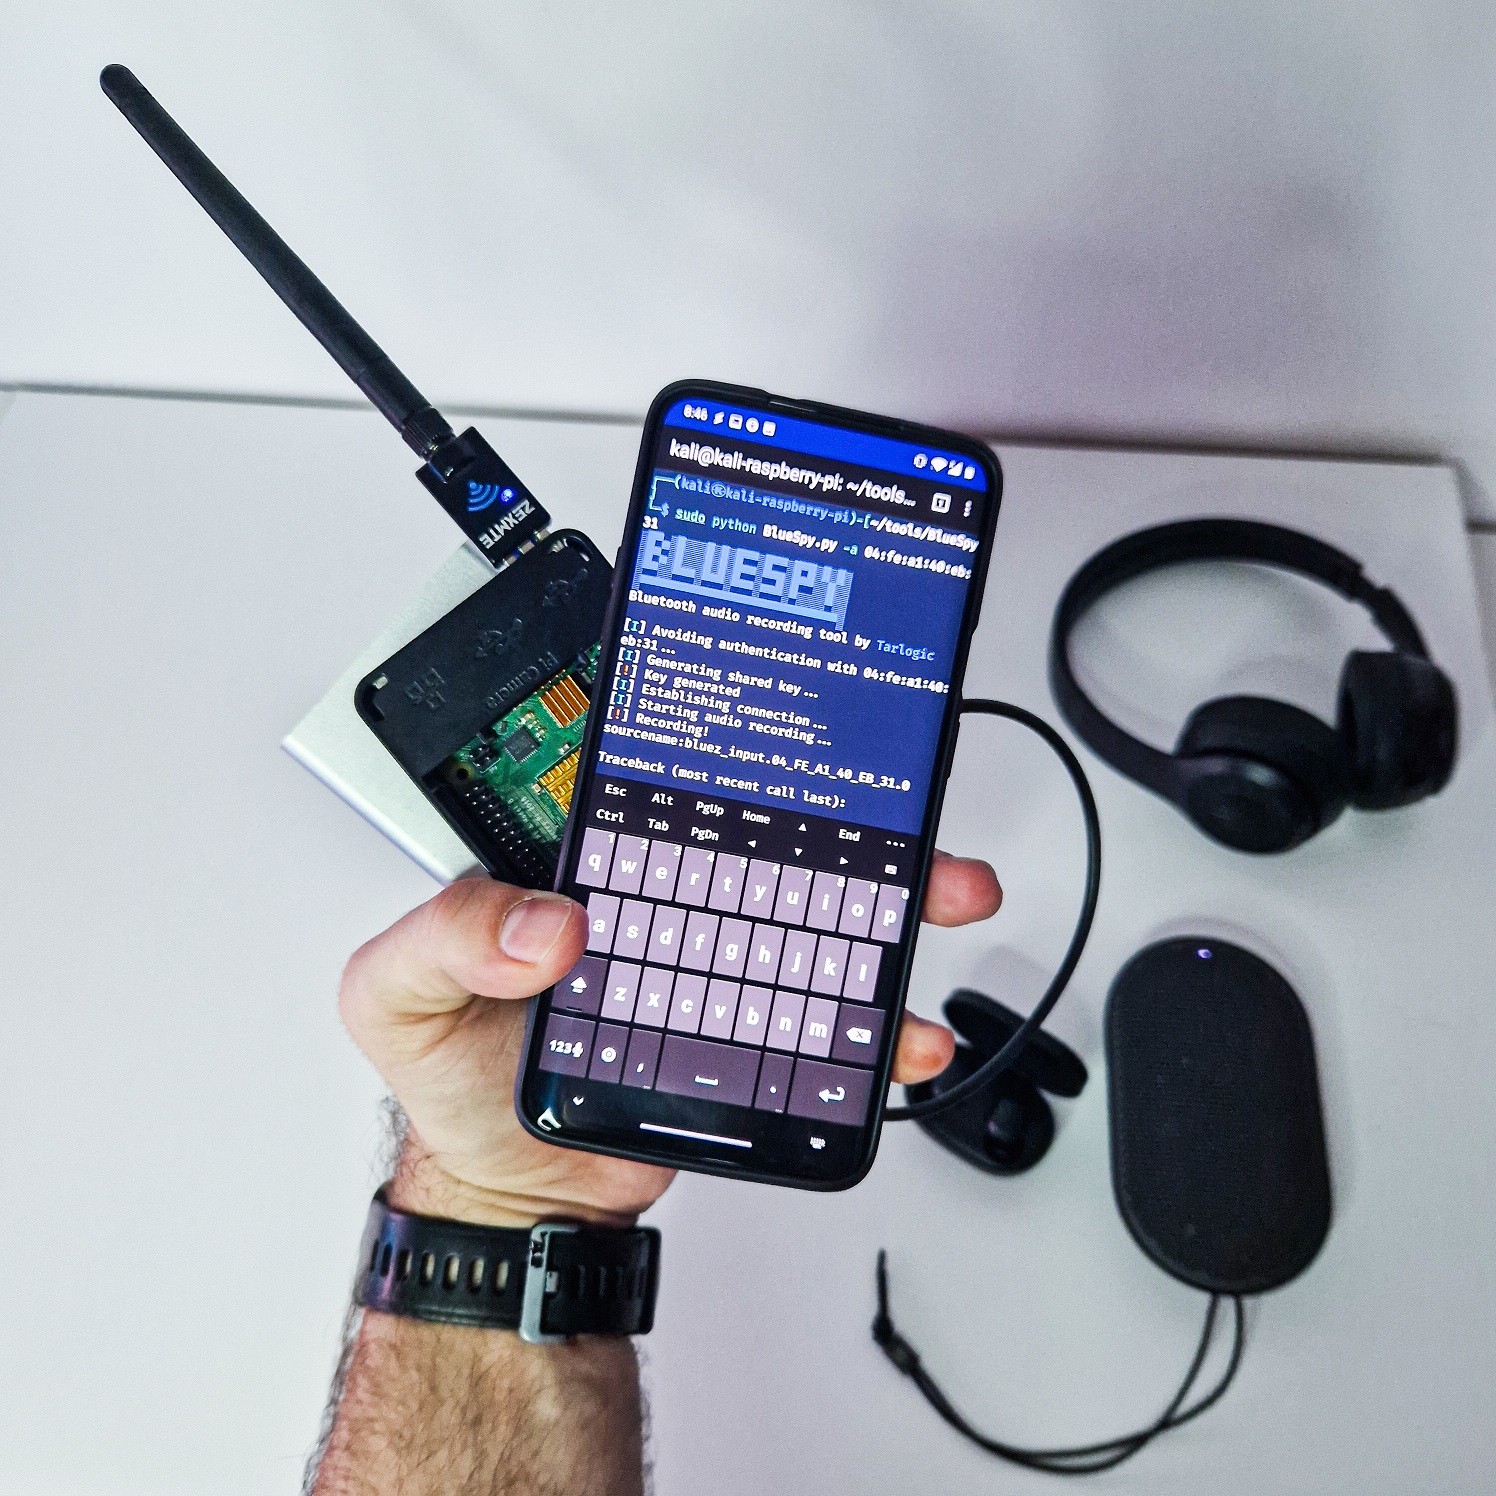 This critical security issue allows third party user to record audio from Bluetooth speaker with built-in microphone in vicinity, even when it is alre